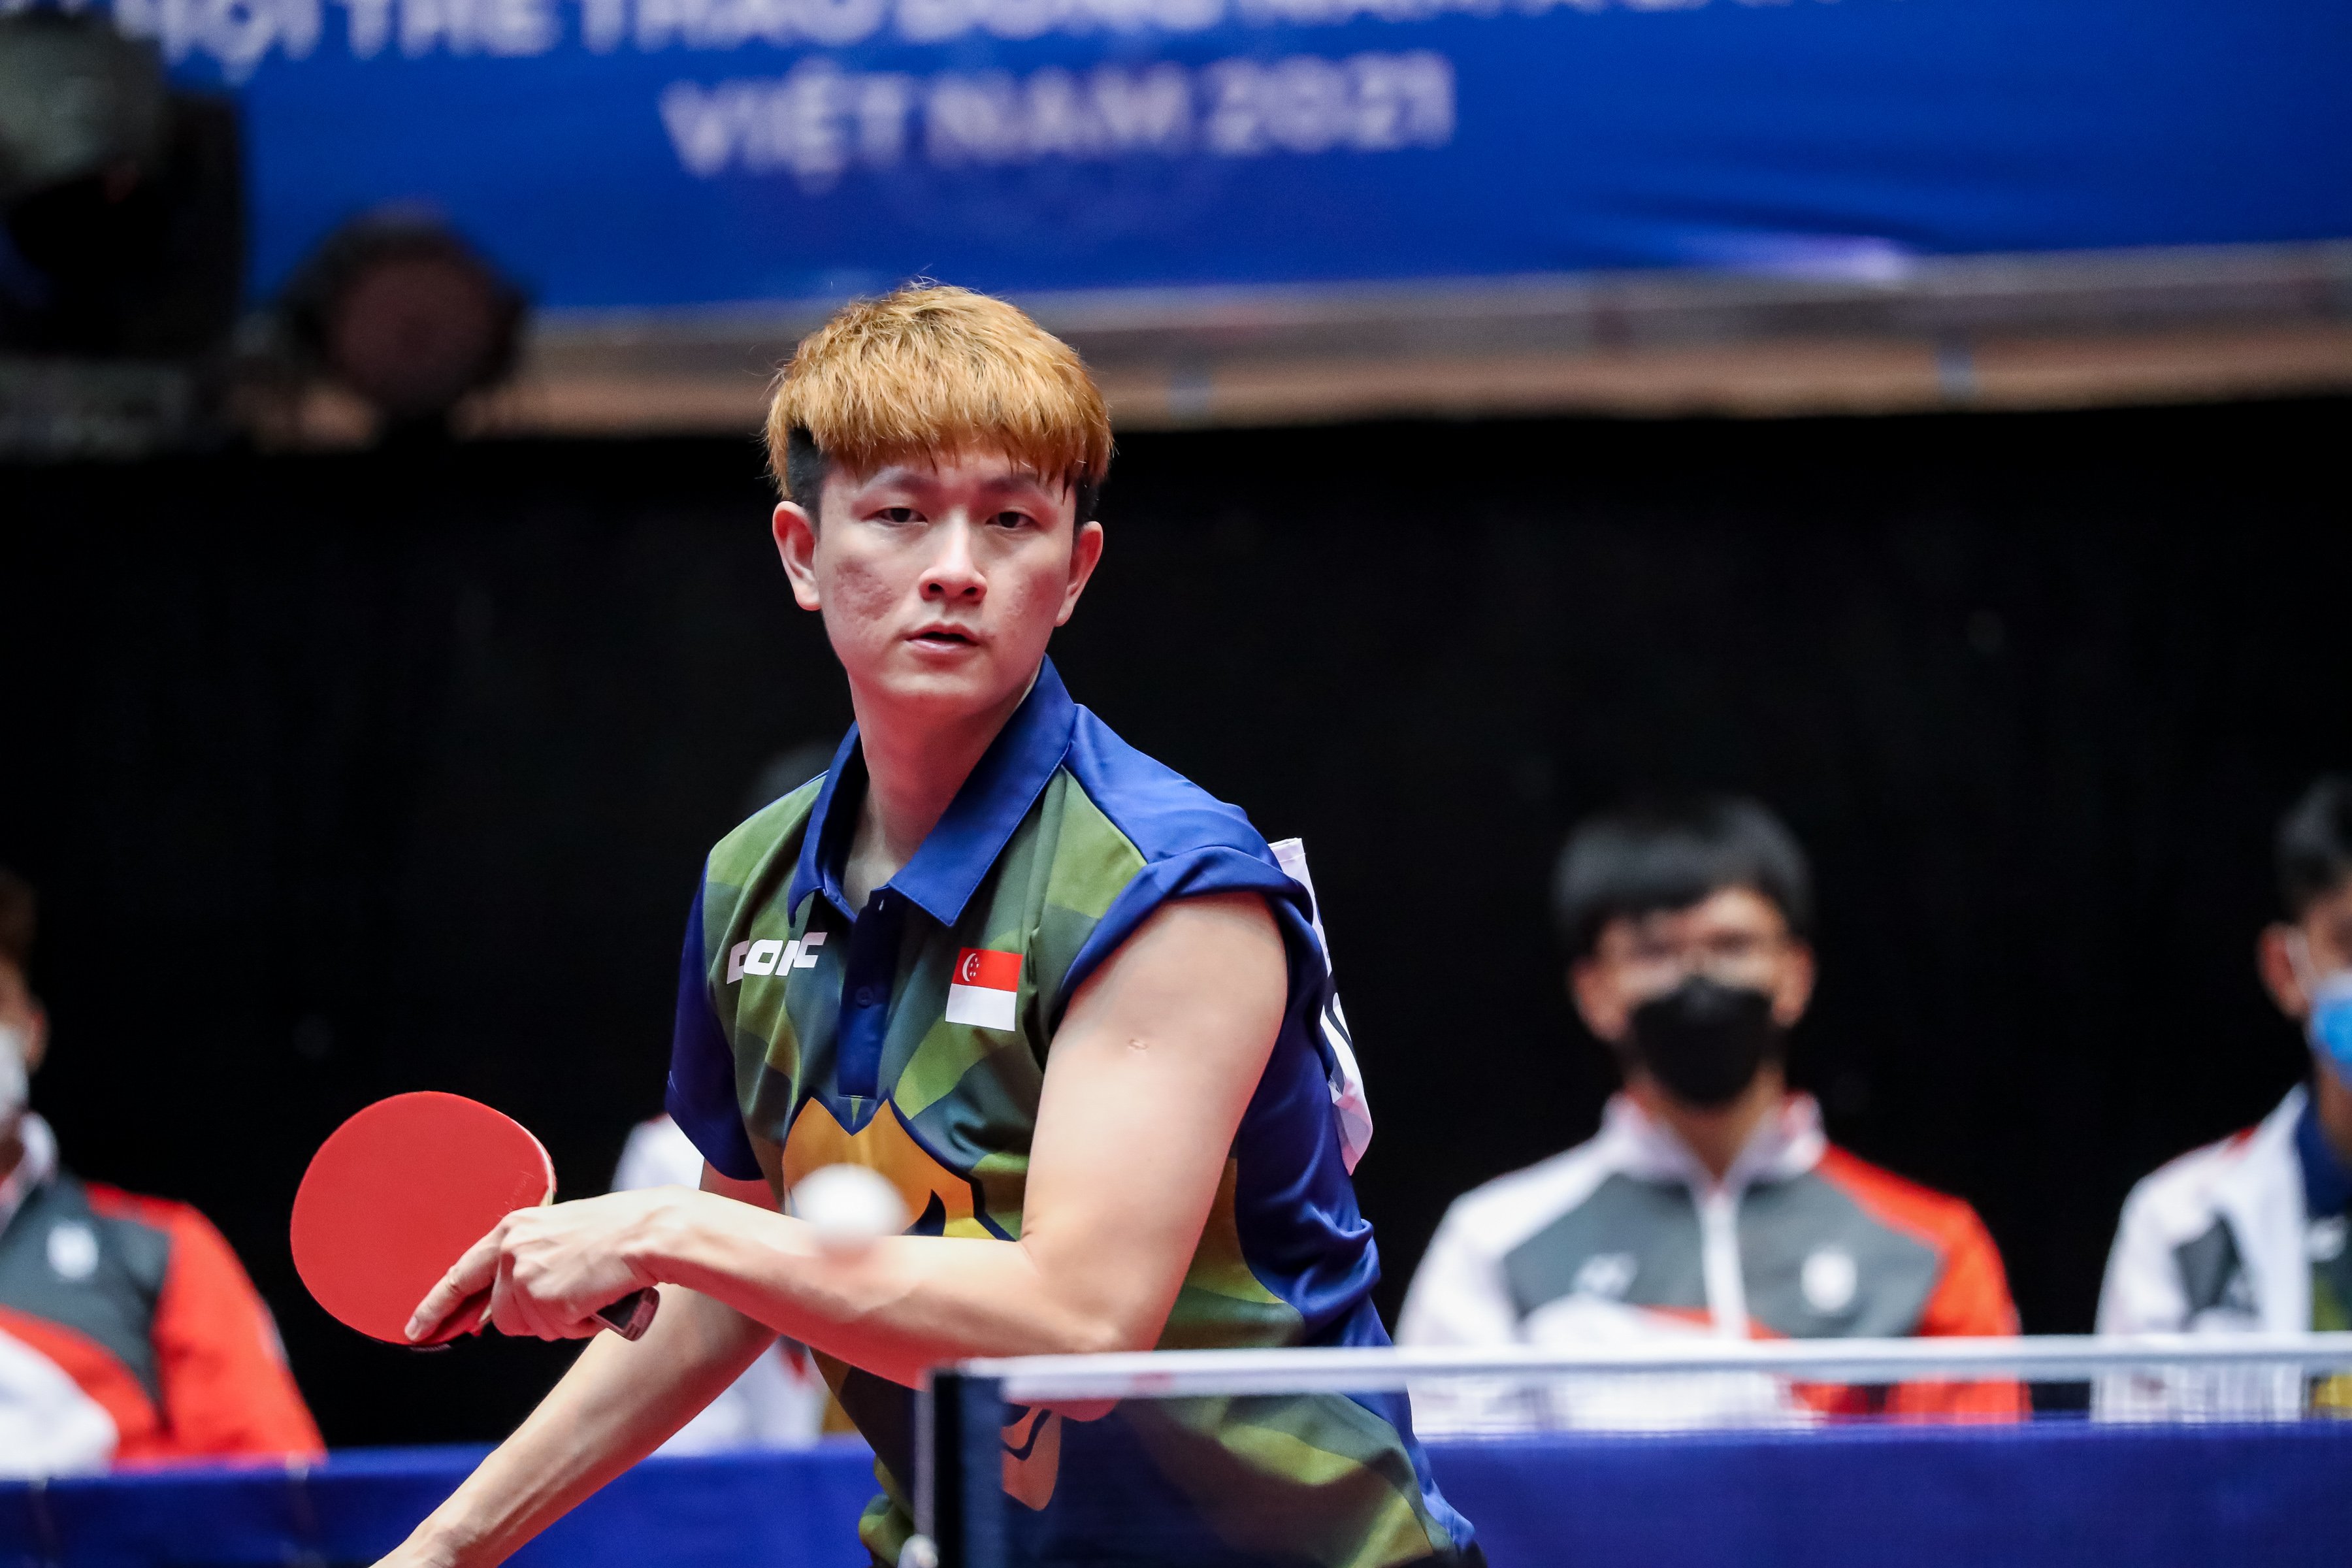 20220513_Table Tennis_kw_082